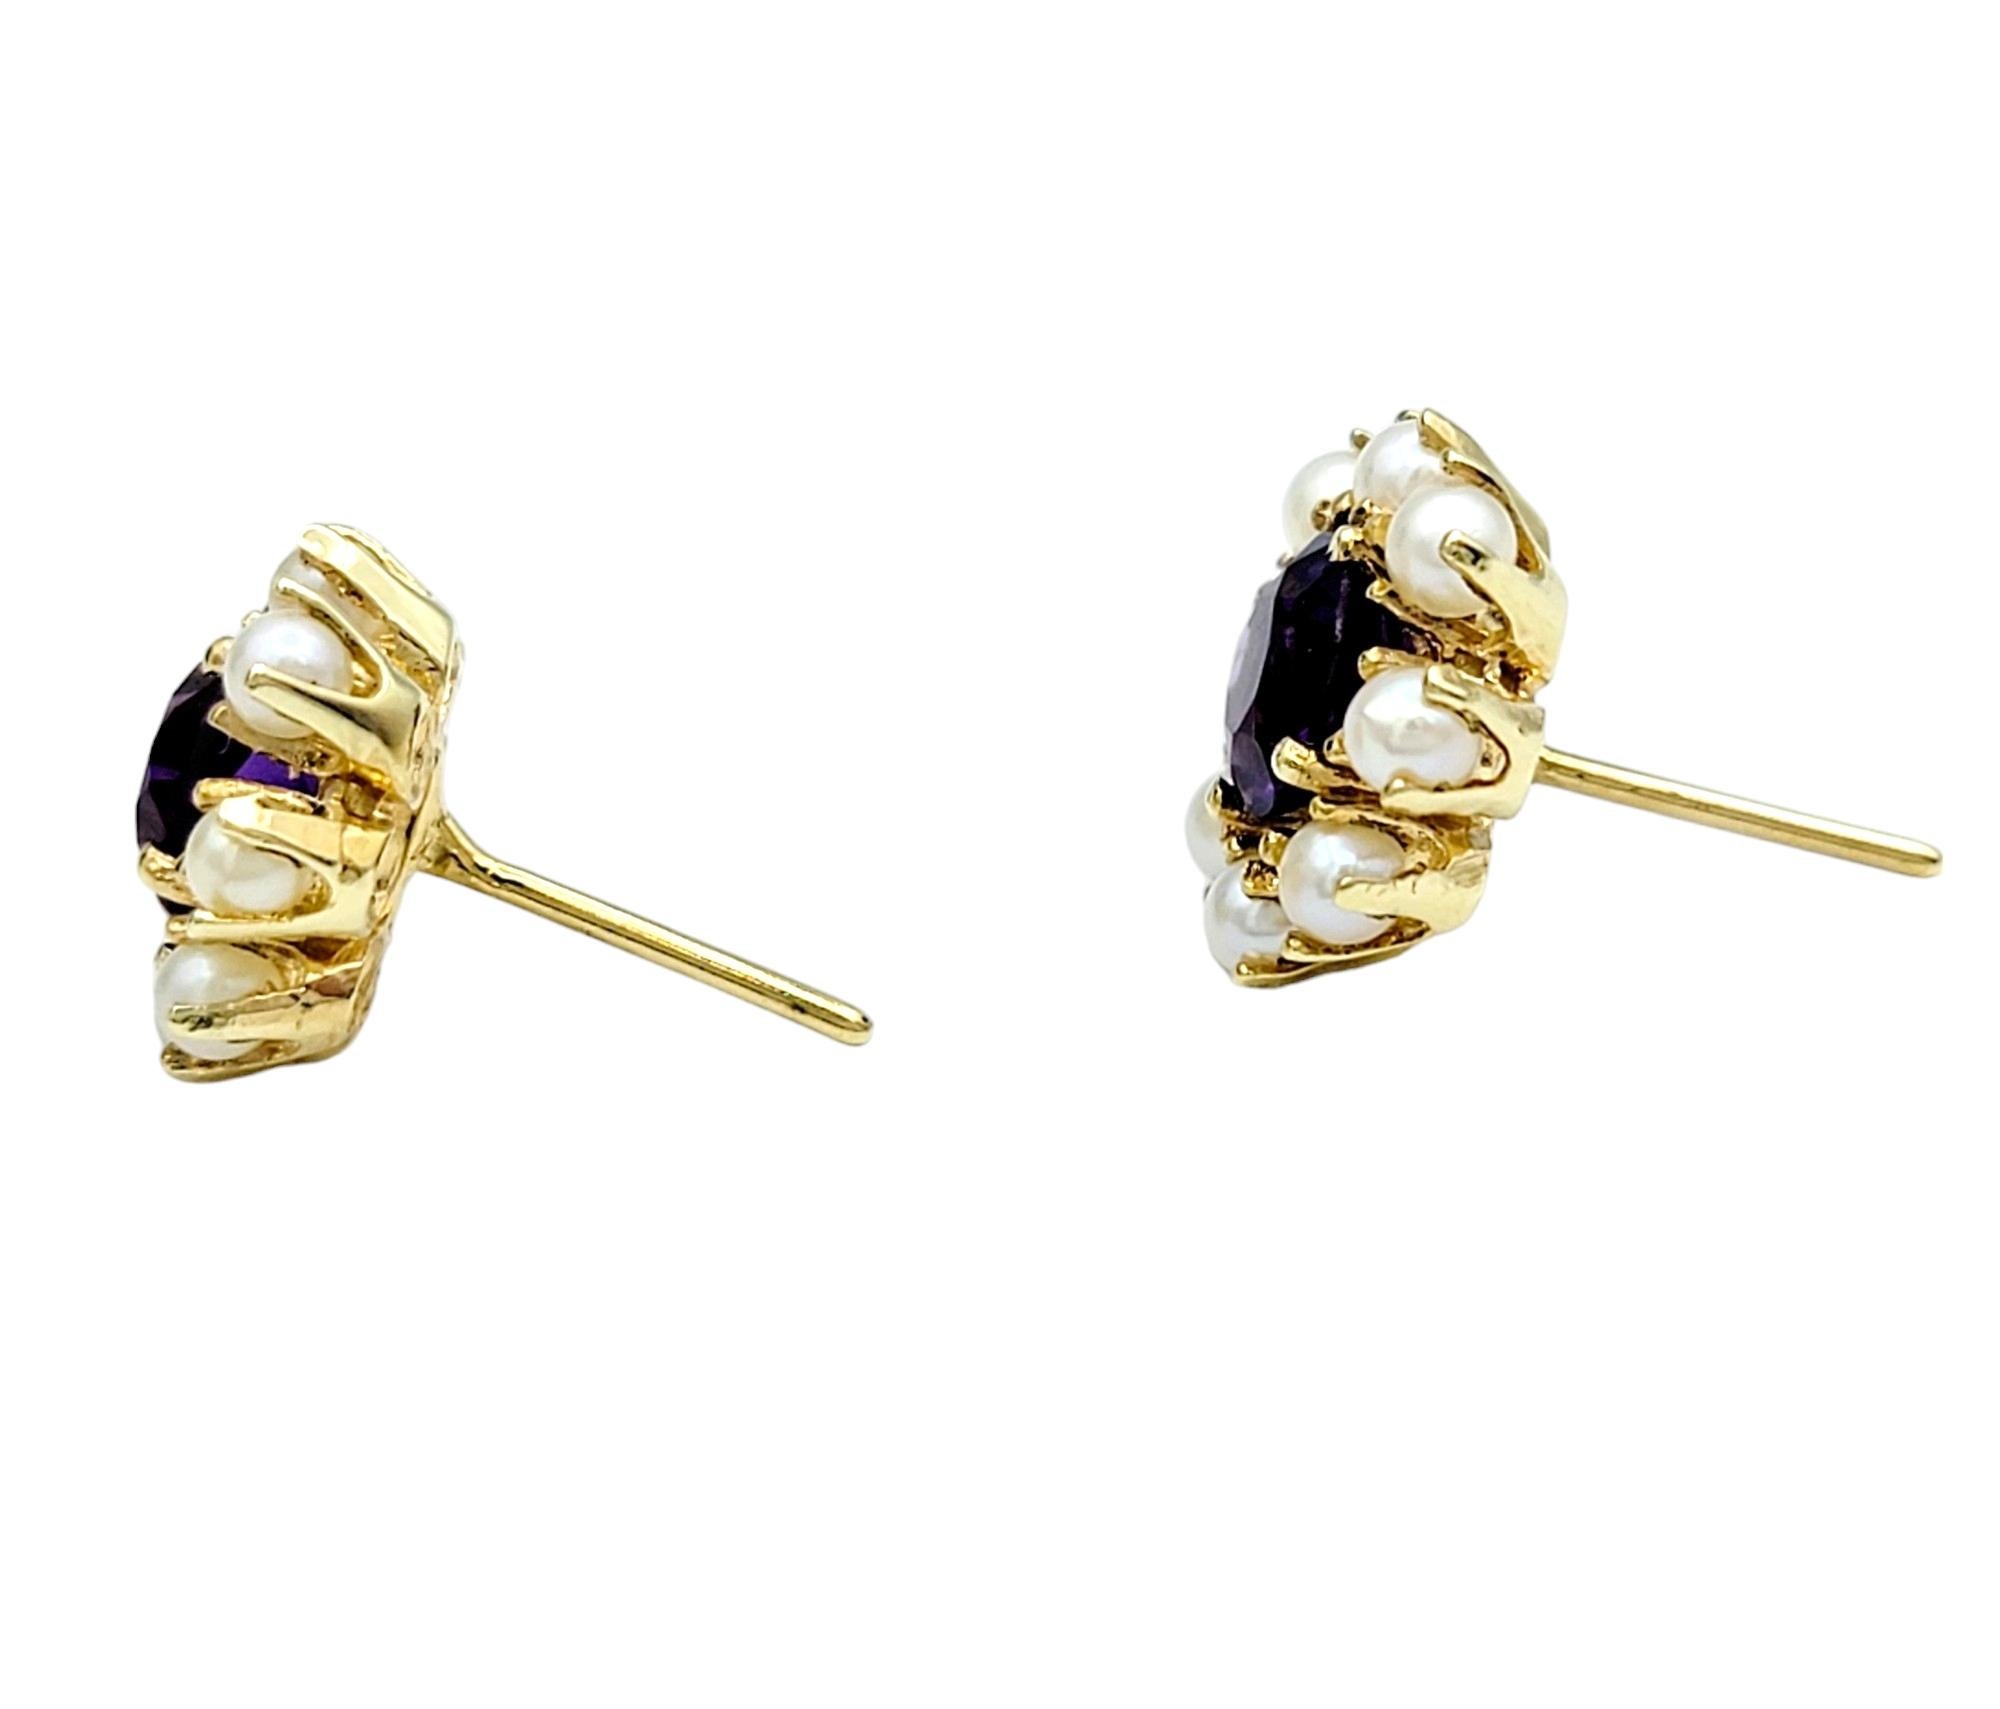 These gorgeous stud earrings, set in warm and radiant 14 karat yellow gold, exude a captivating charm. At the heart of each earring is a round amethyst, showcasing its vibrant purple hue and inherent allure. Surrounding the amethyst is a delicate